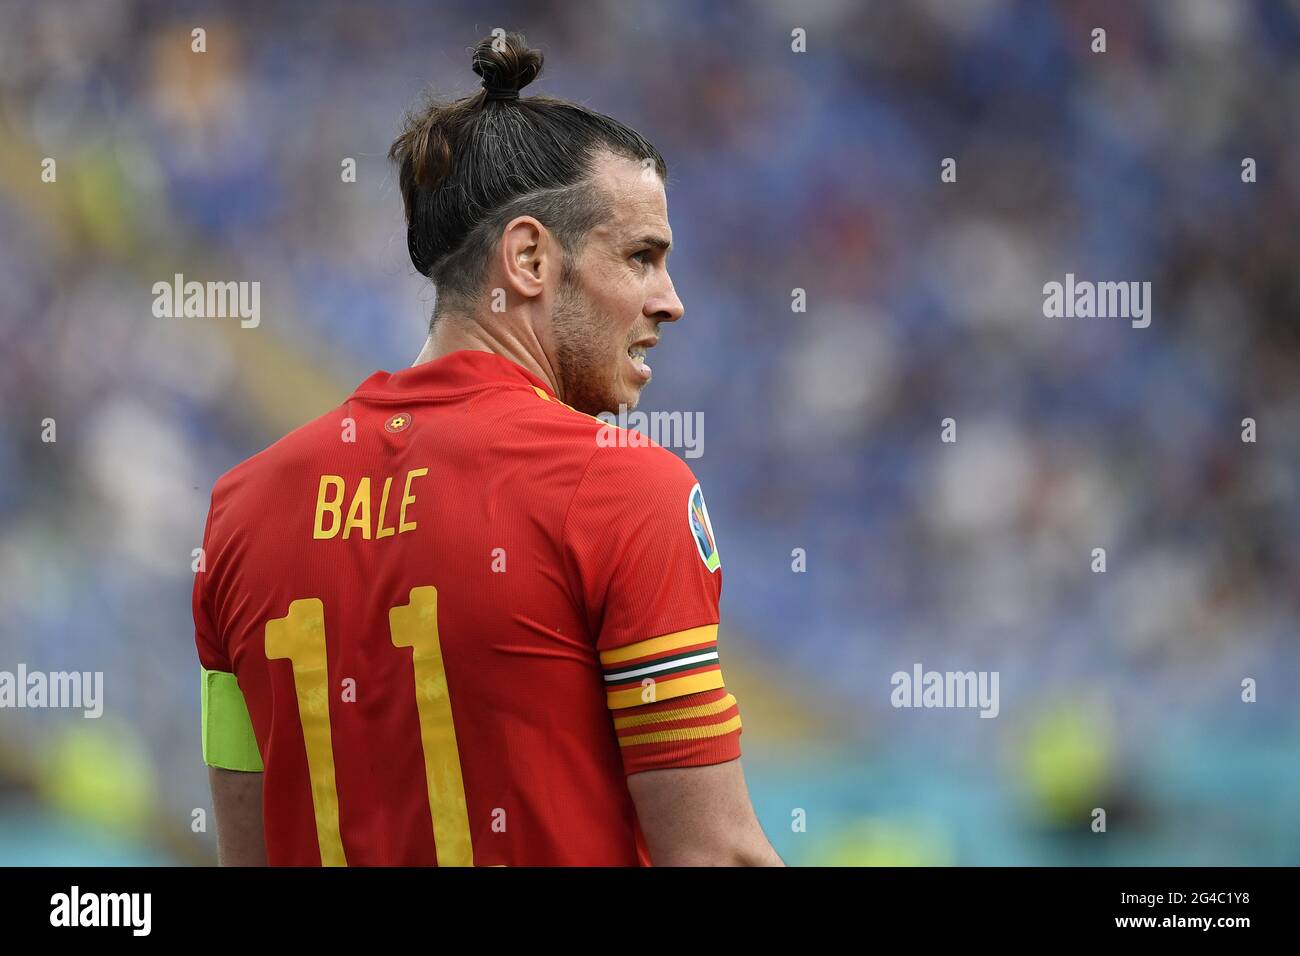 Roma, Italy. 20th June, 2021. Gareth Bale of Wales reacts during the Uefa Euro 2020 Group A football match between Italy and Wales at stadio Olimpico in Rome (Italy), June 20th, 2021. Photo Andrea Staccioli/Insidefoto Credit: insidefoto srl/Alamy Live News Stock Photo